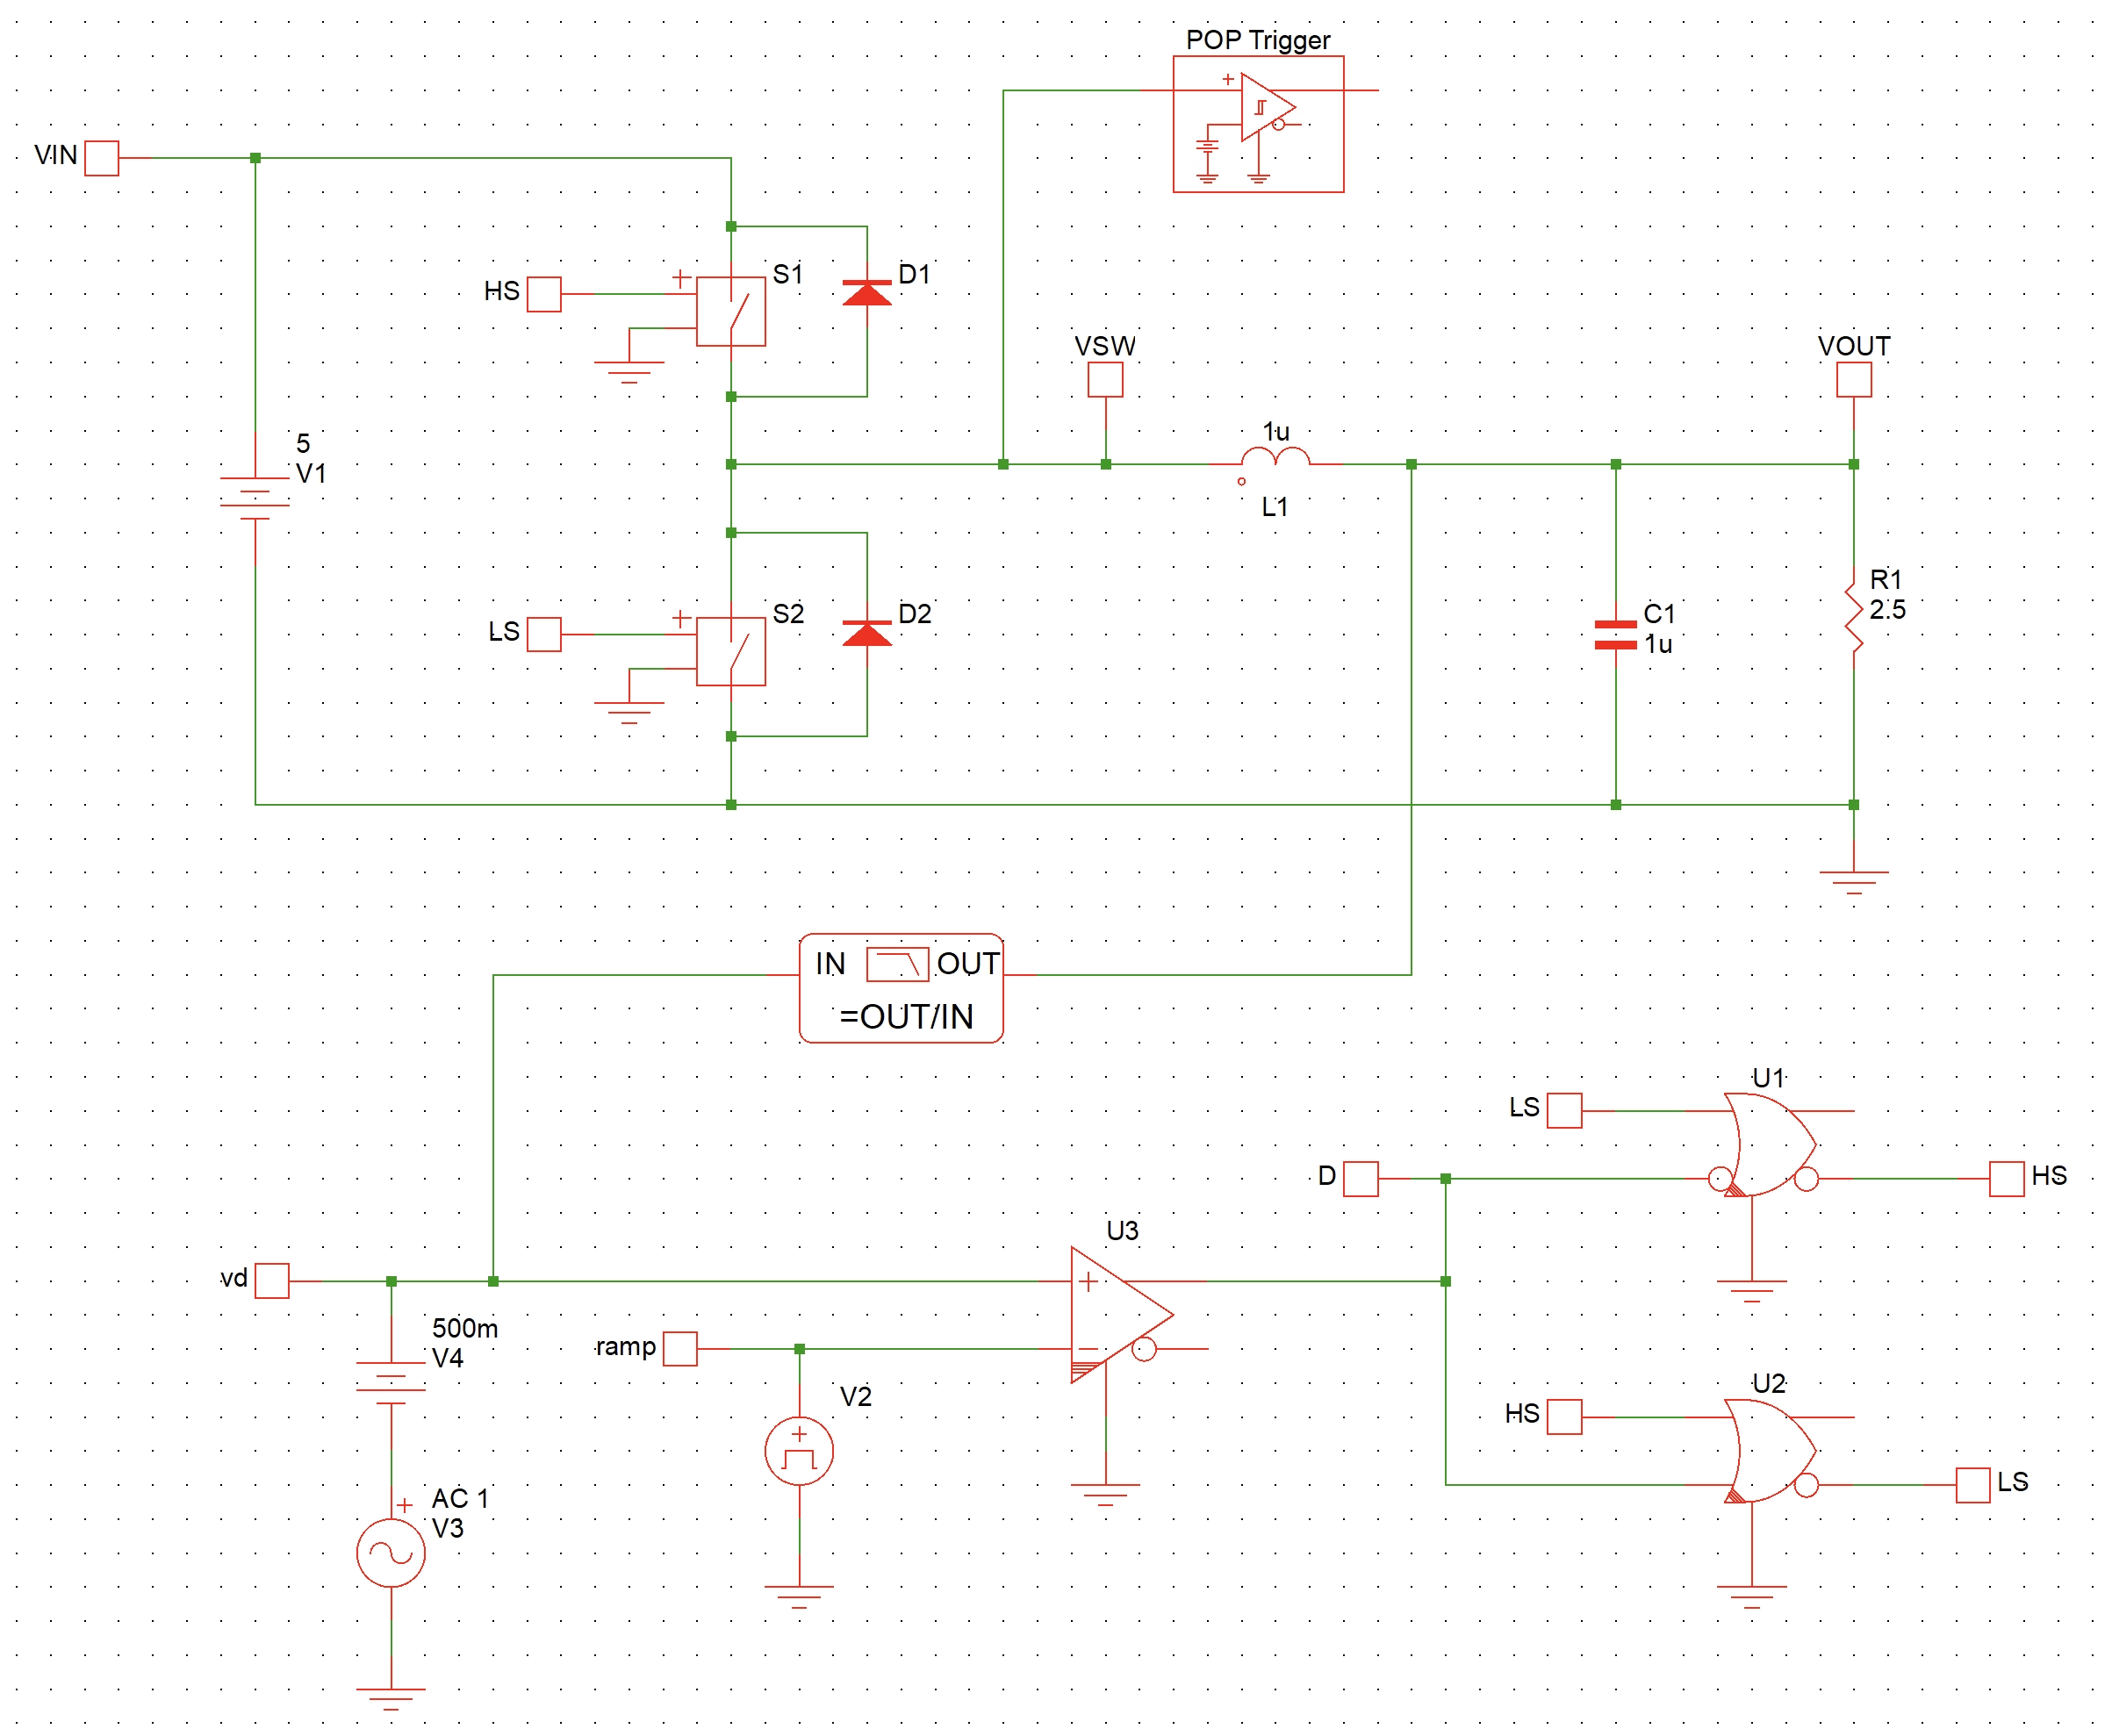 Buck converter model in Simplis with resistive load